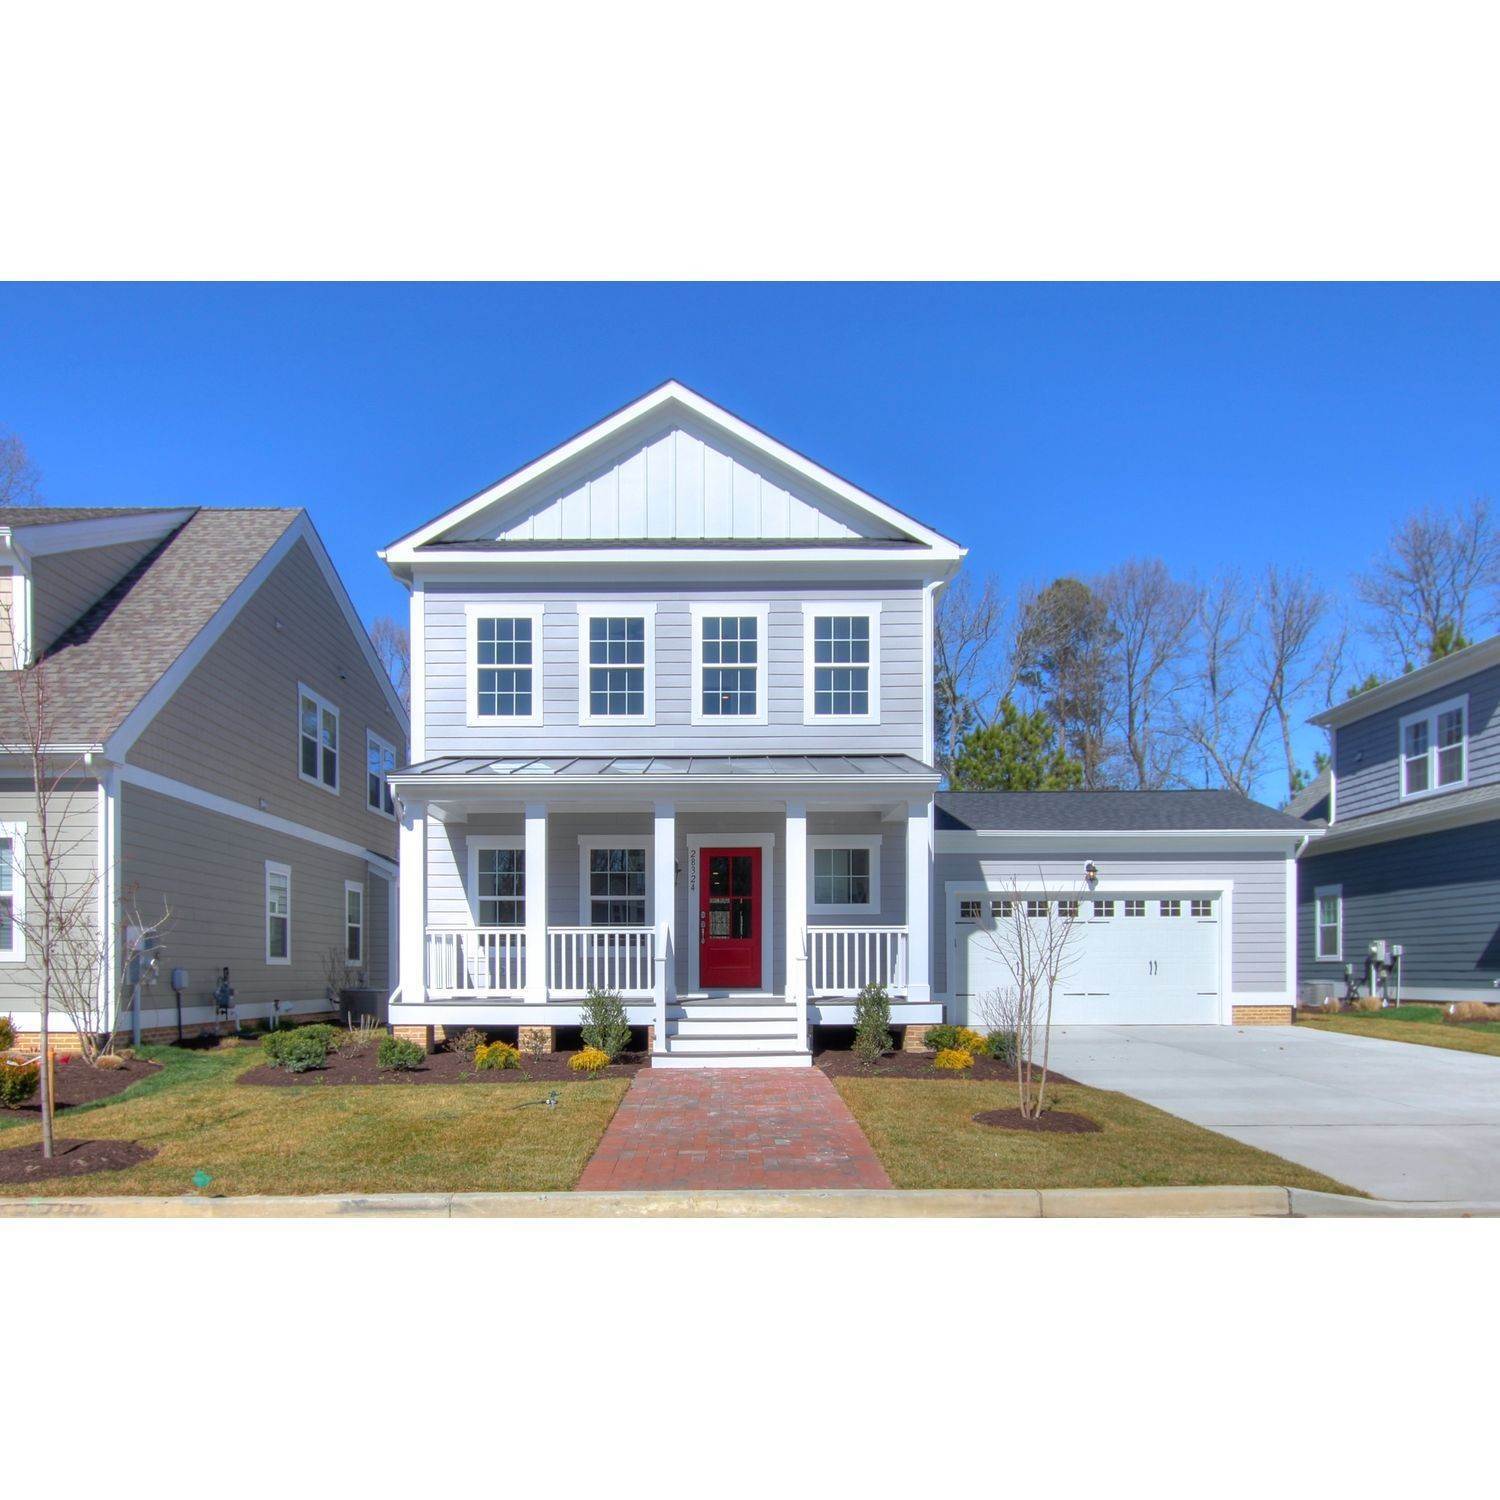 6. Covell Signature Homes κτίριο σε 110 Channel Marker Way, Grasonville, MD 21638